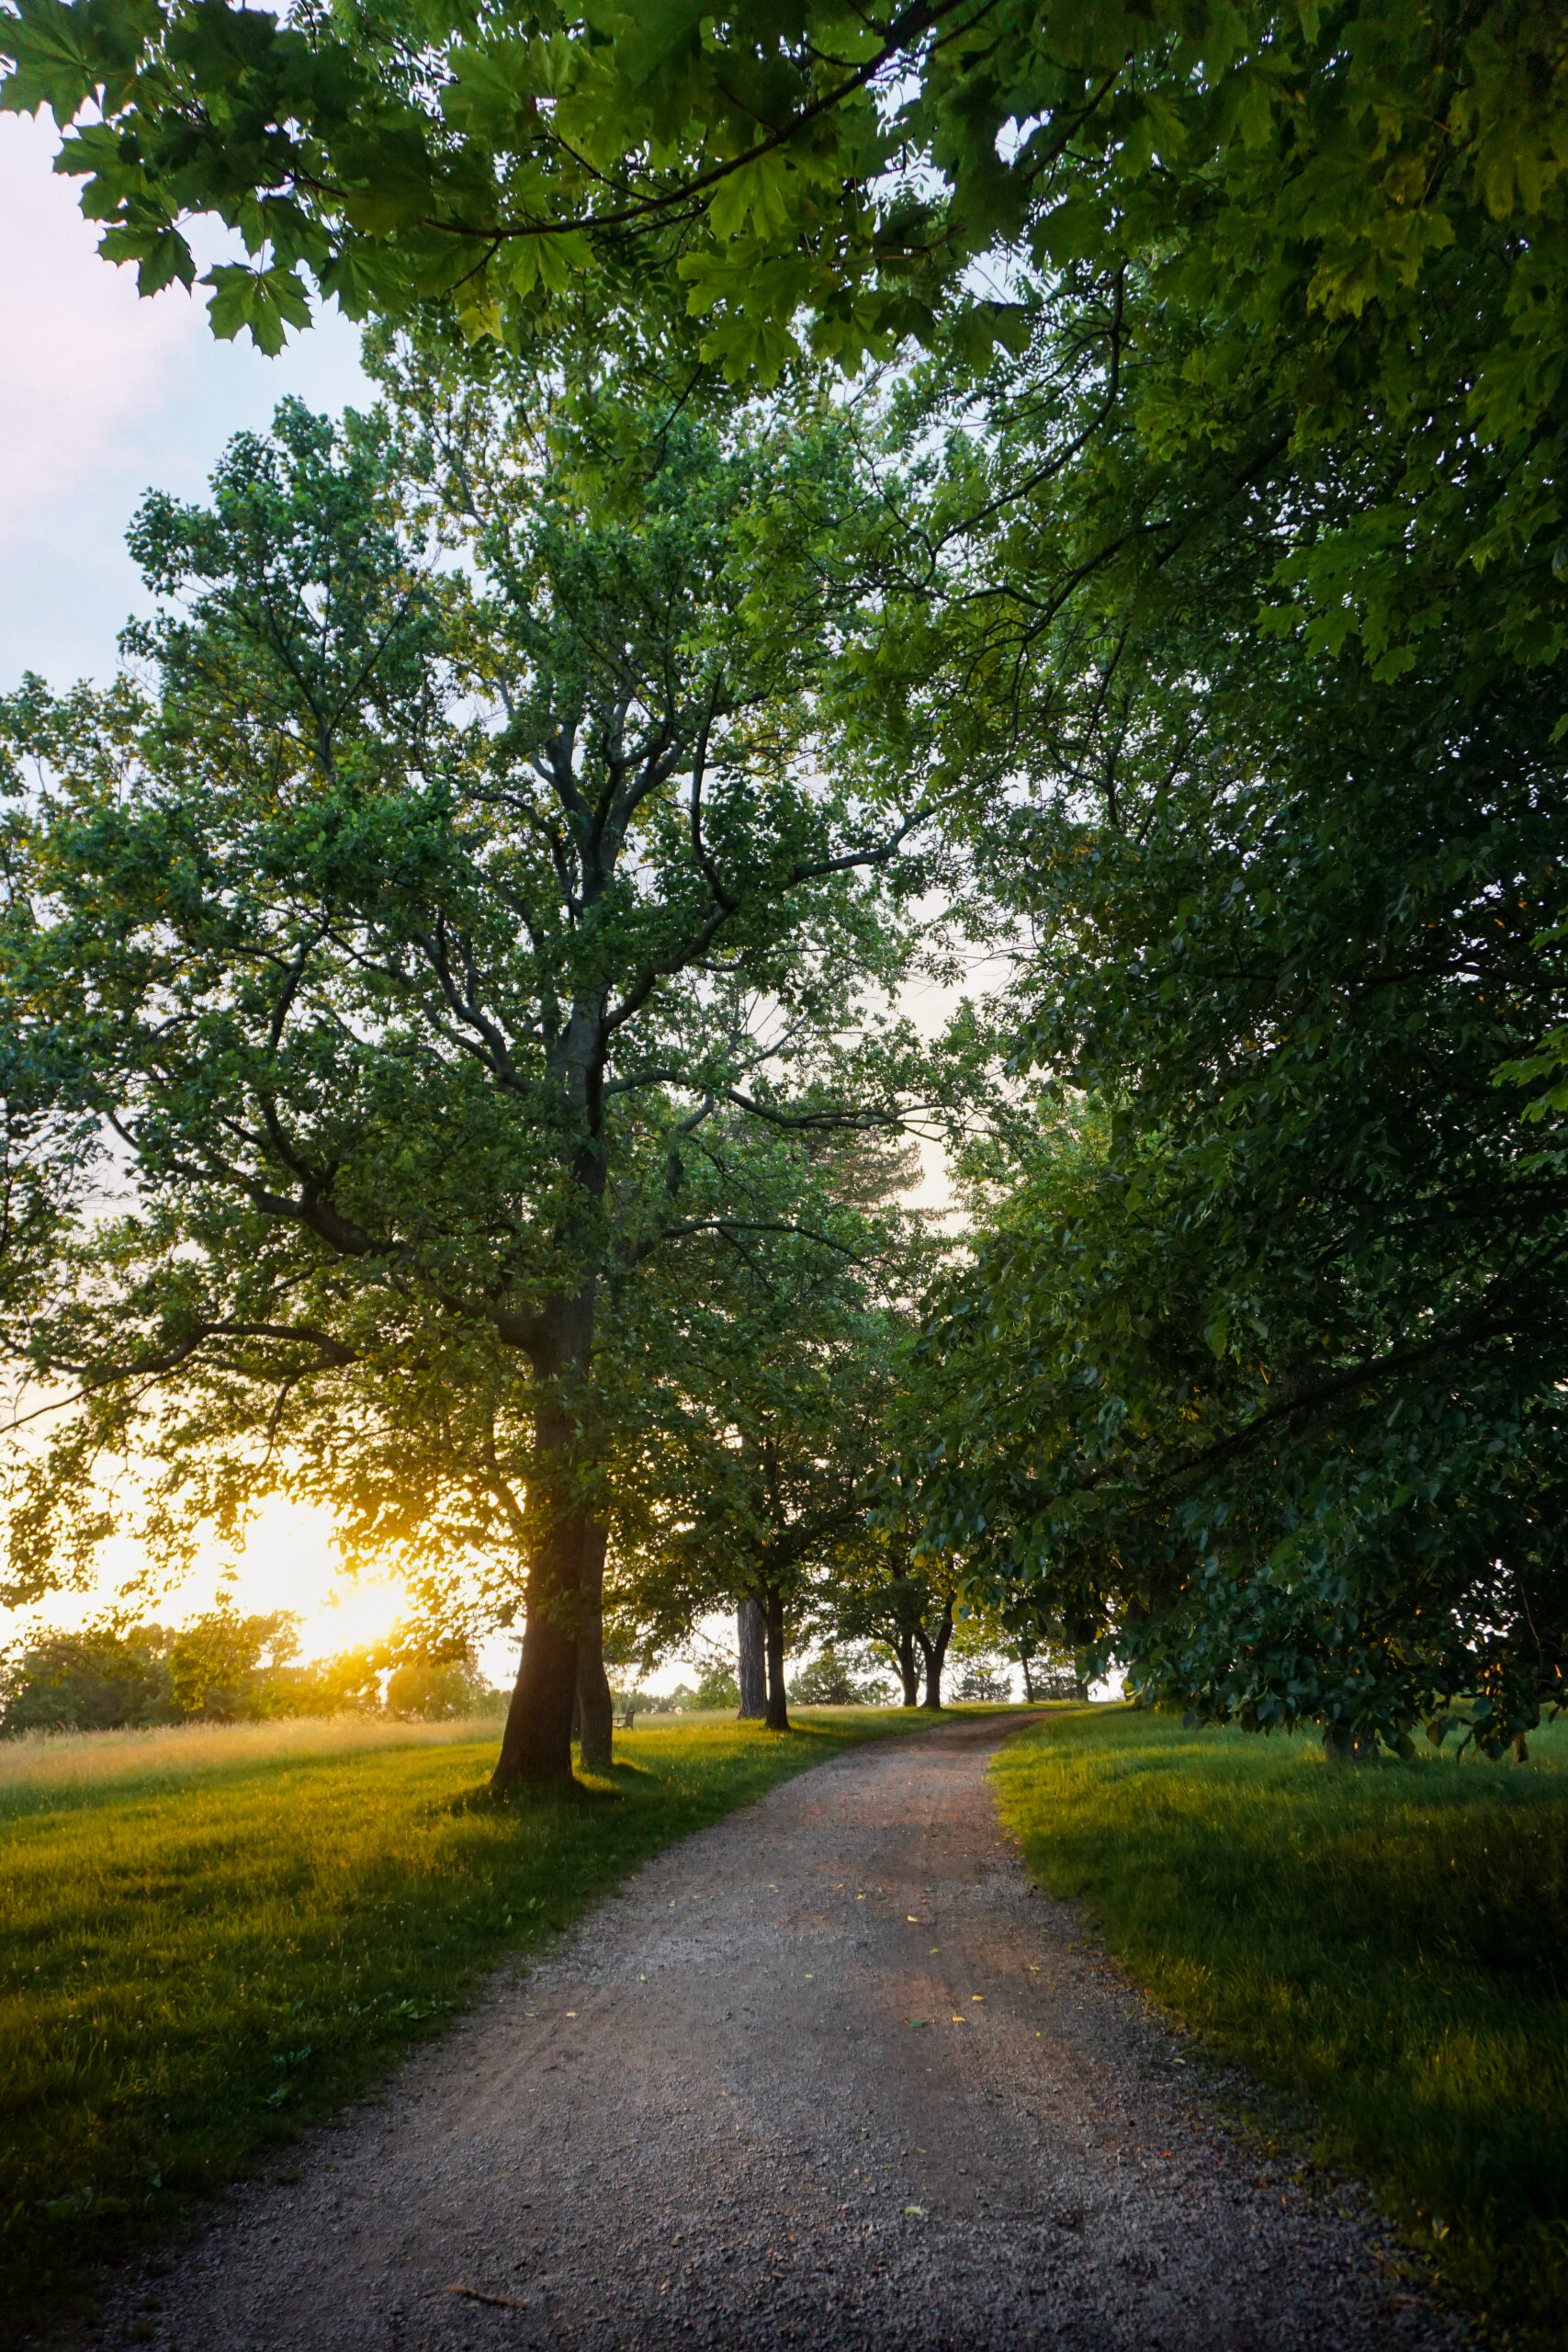 A tree-lined path at sunset.